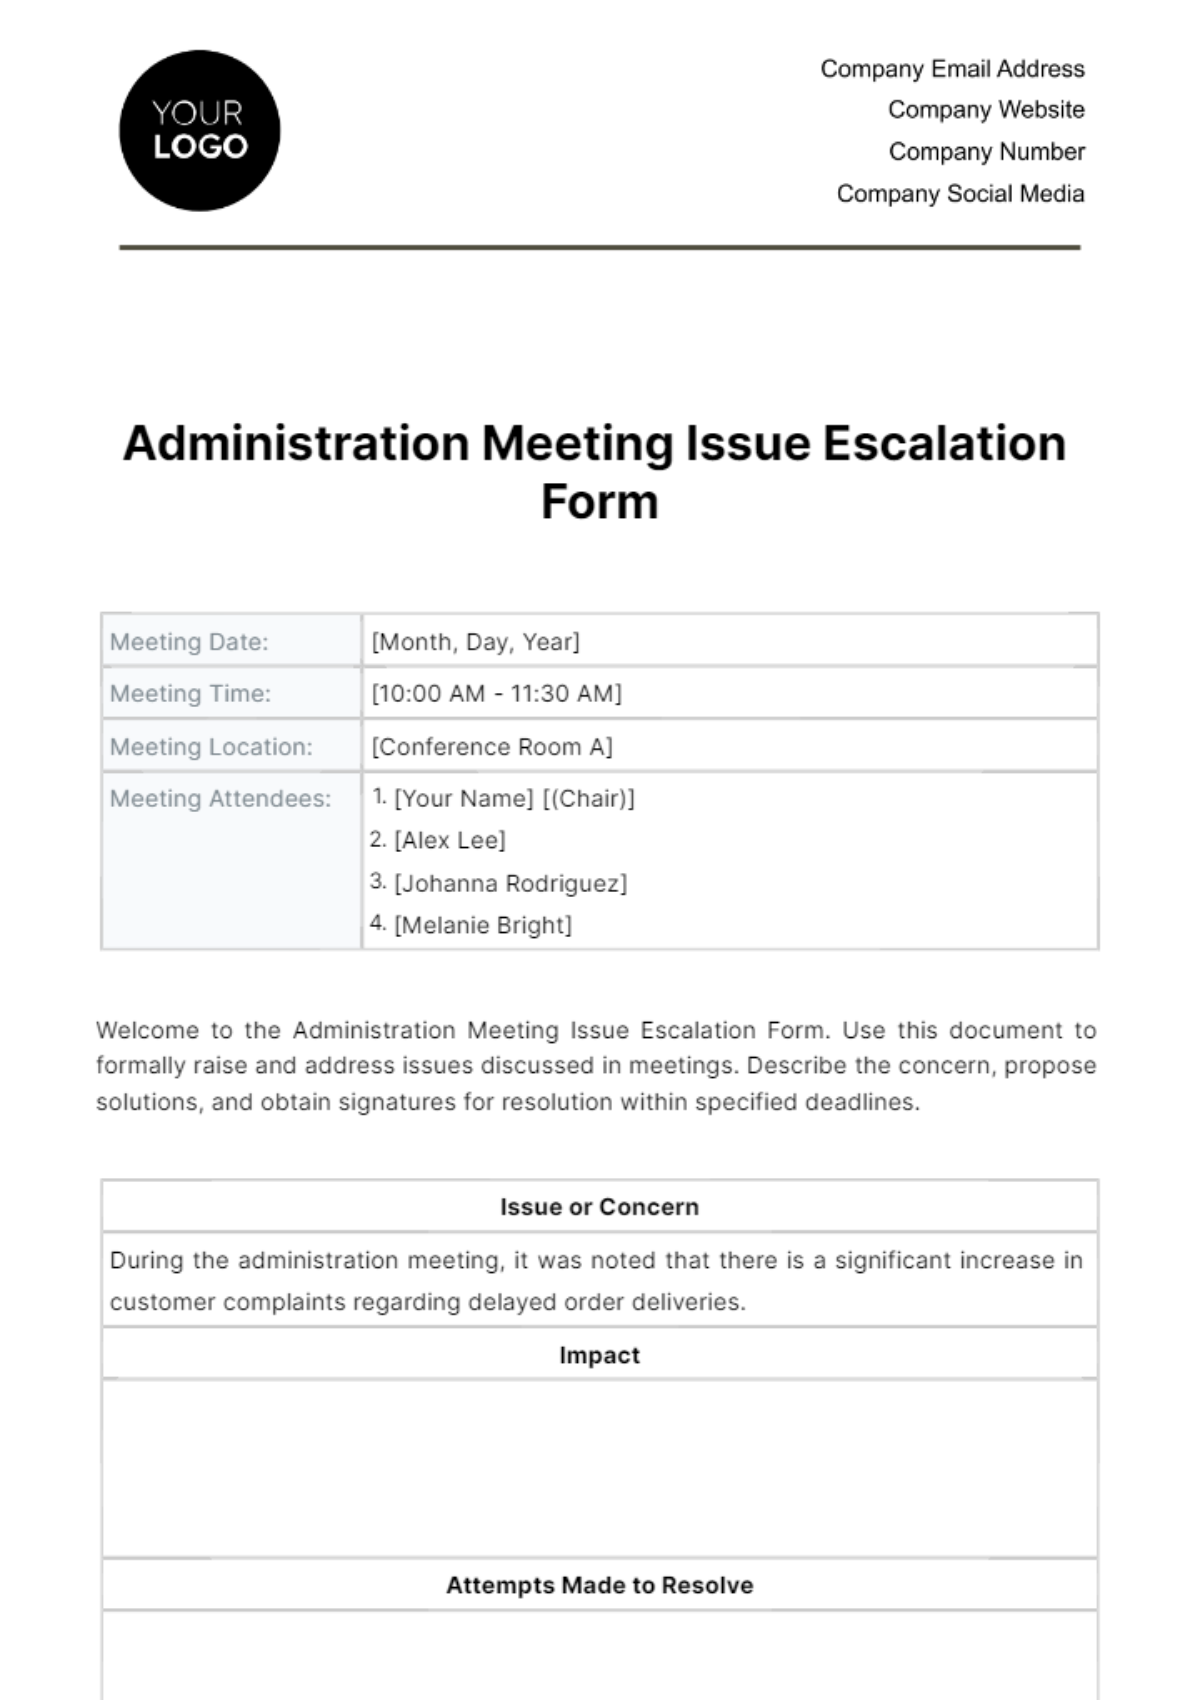 Administration Meeting Issue Escalation Form Template